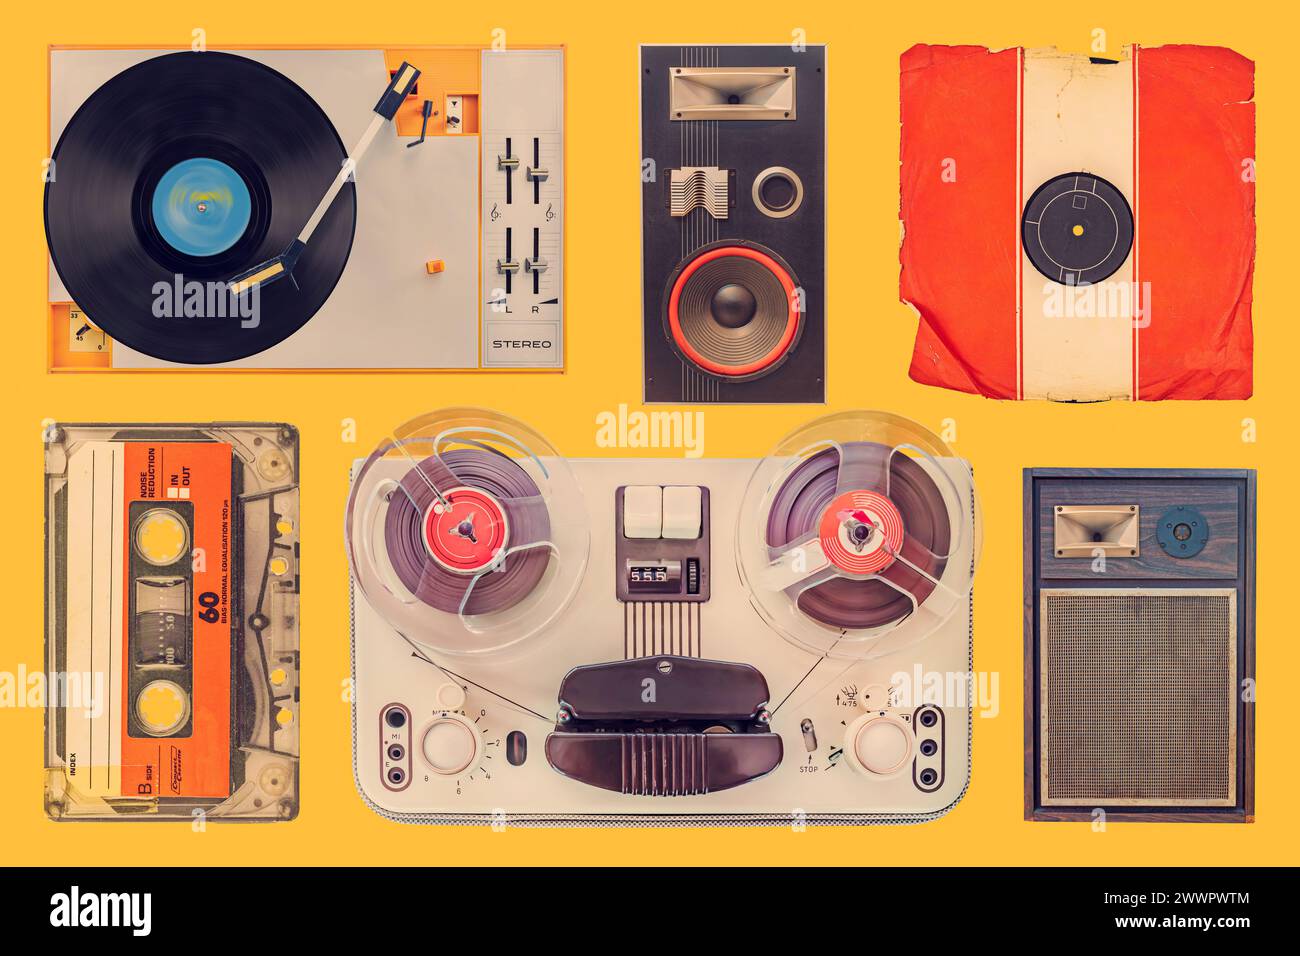 Collection of a vintage turntable, speakers, record, compact cassette and tape recorder on an orange background Stock Photo